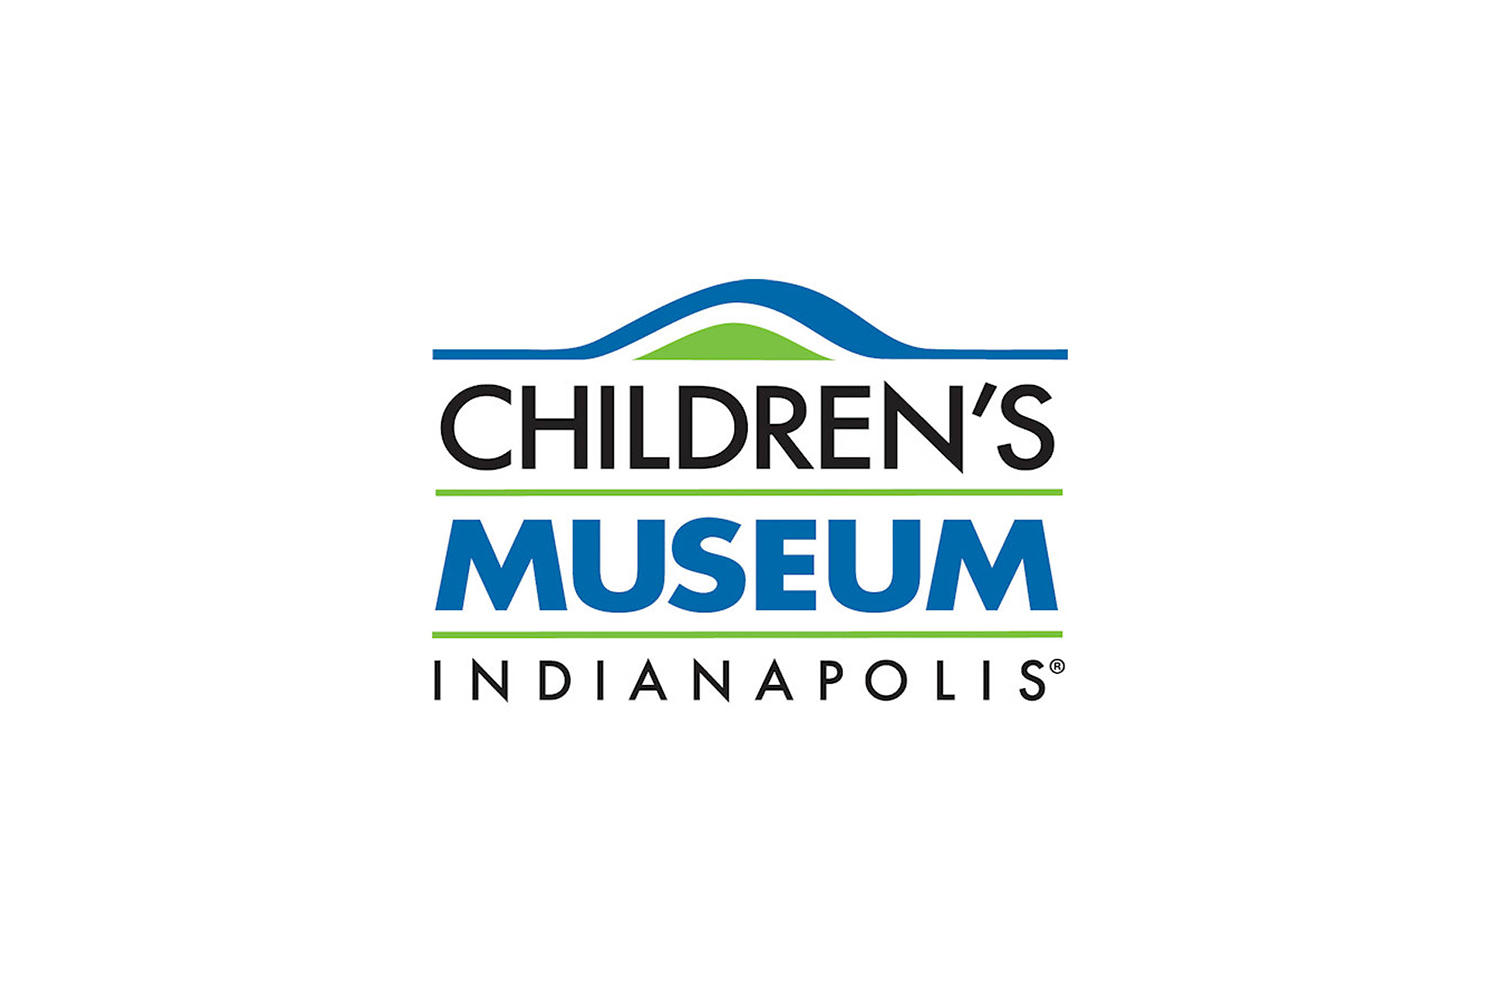 Boss_Display_Client_Childrens_Museum_of_Indianapolis_Logo.jpg